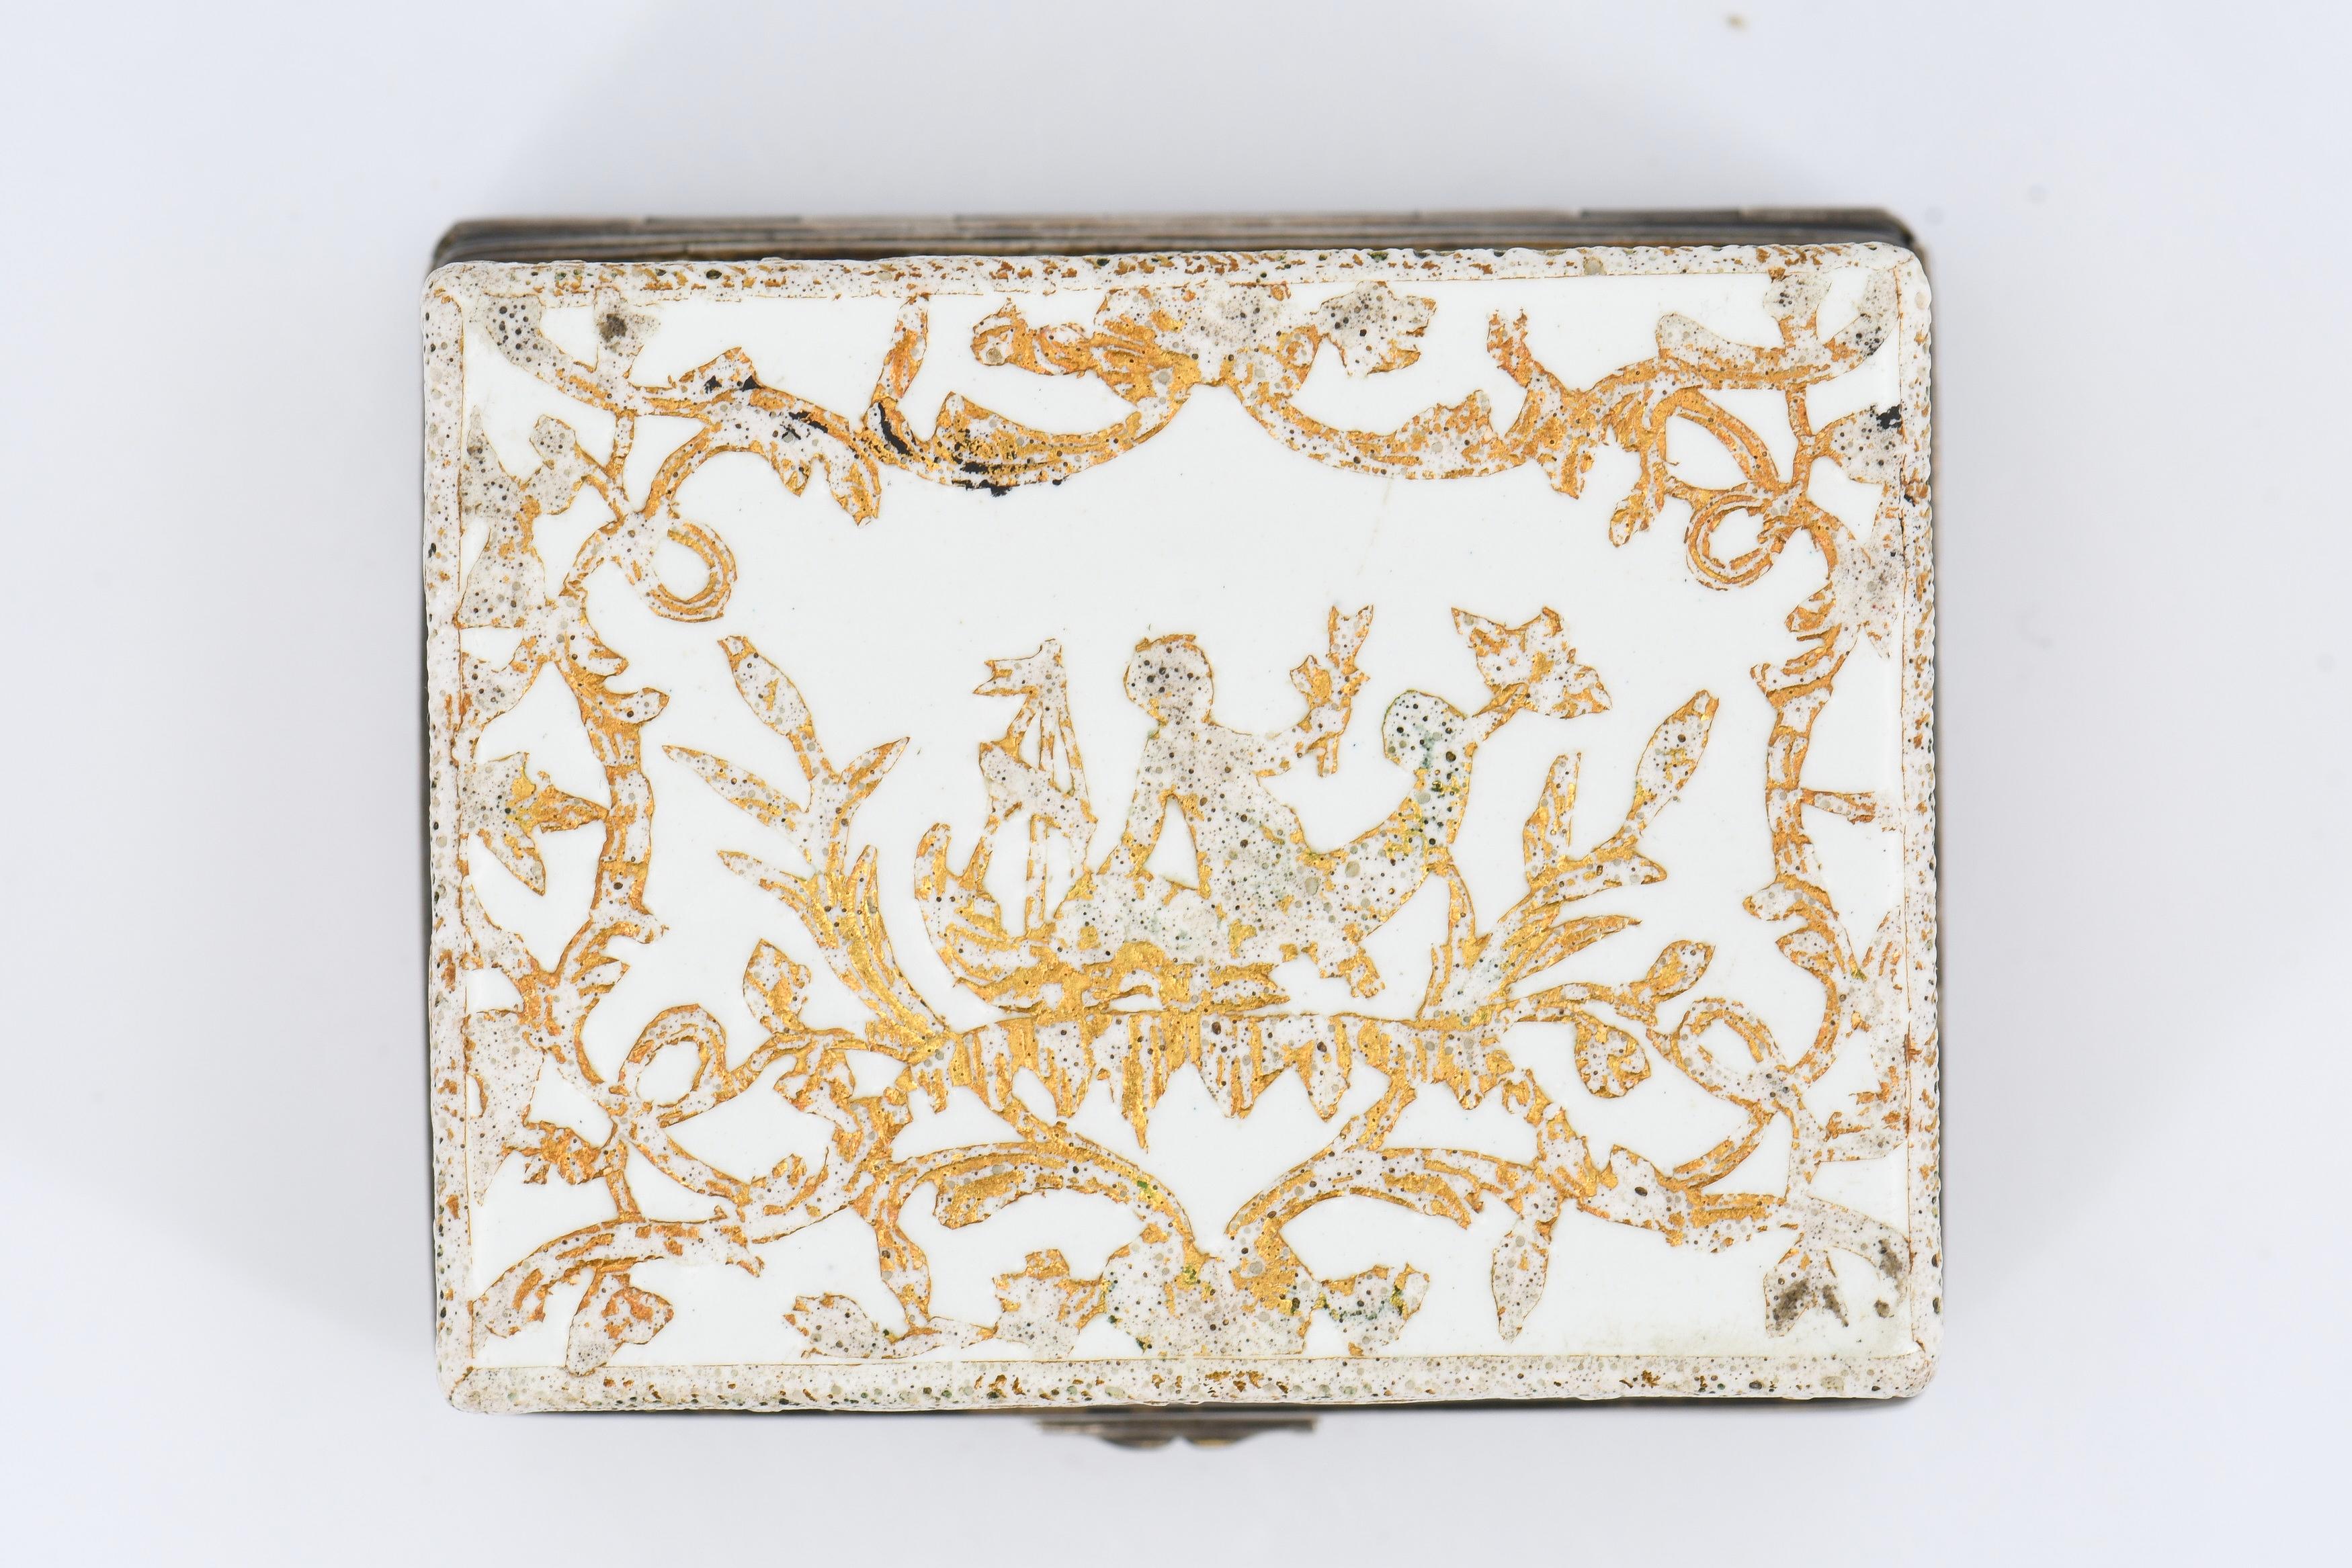 Snuff box with gold décor - Image 3 of 8